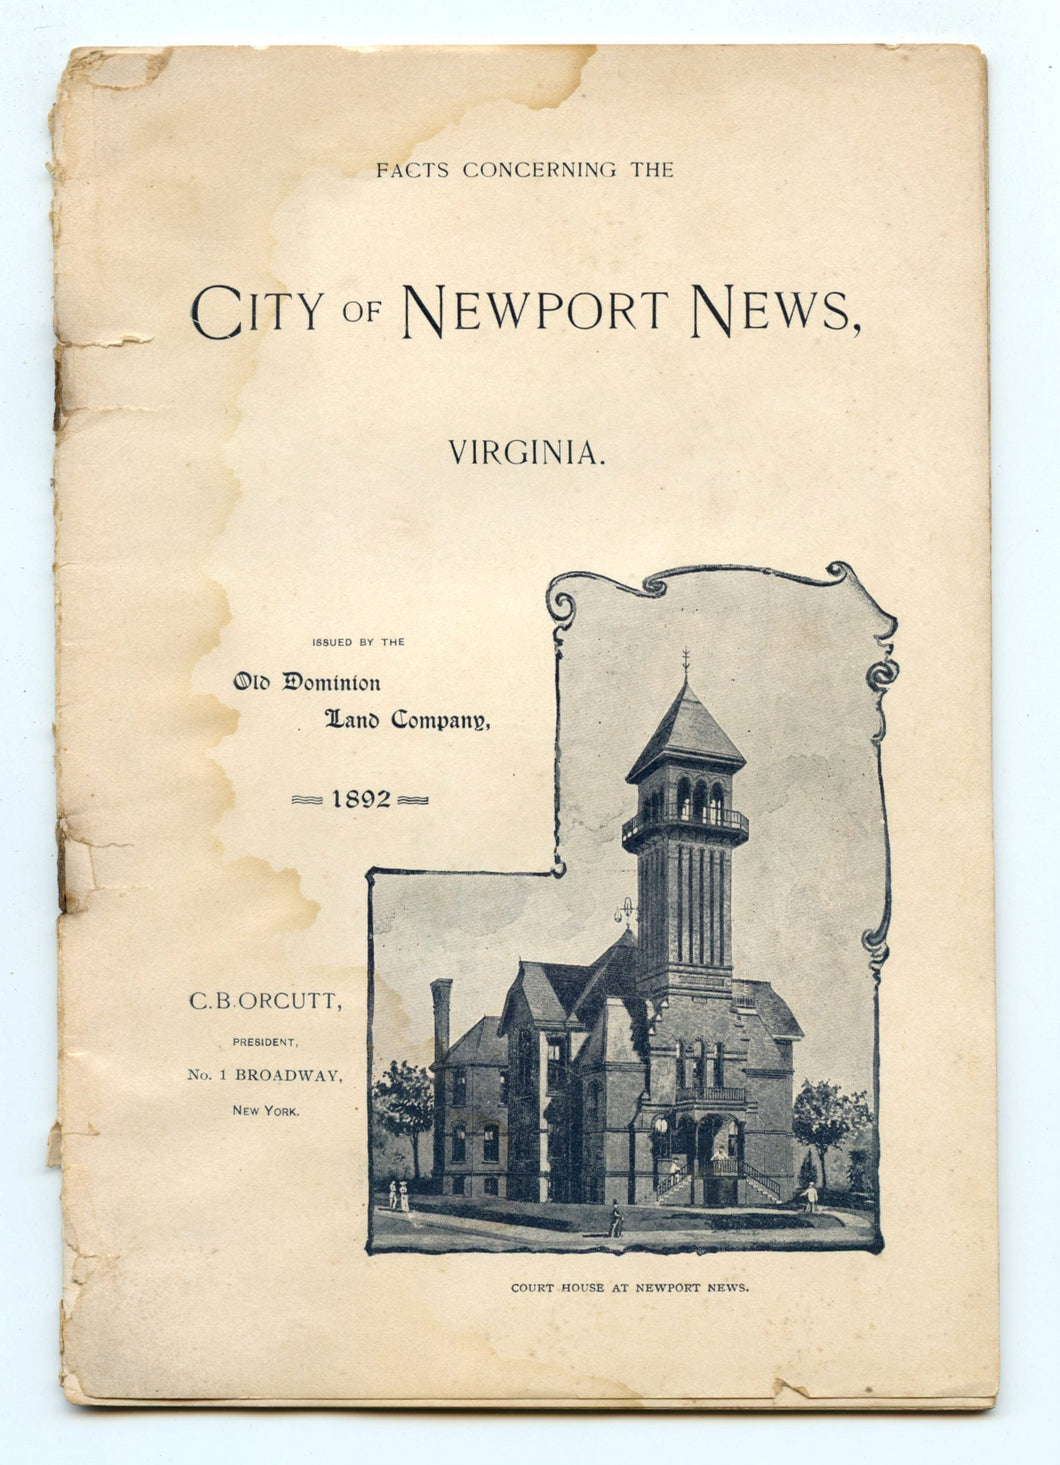 Facts Concerning the City of Newport News, Virginia